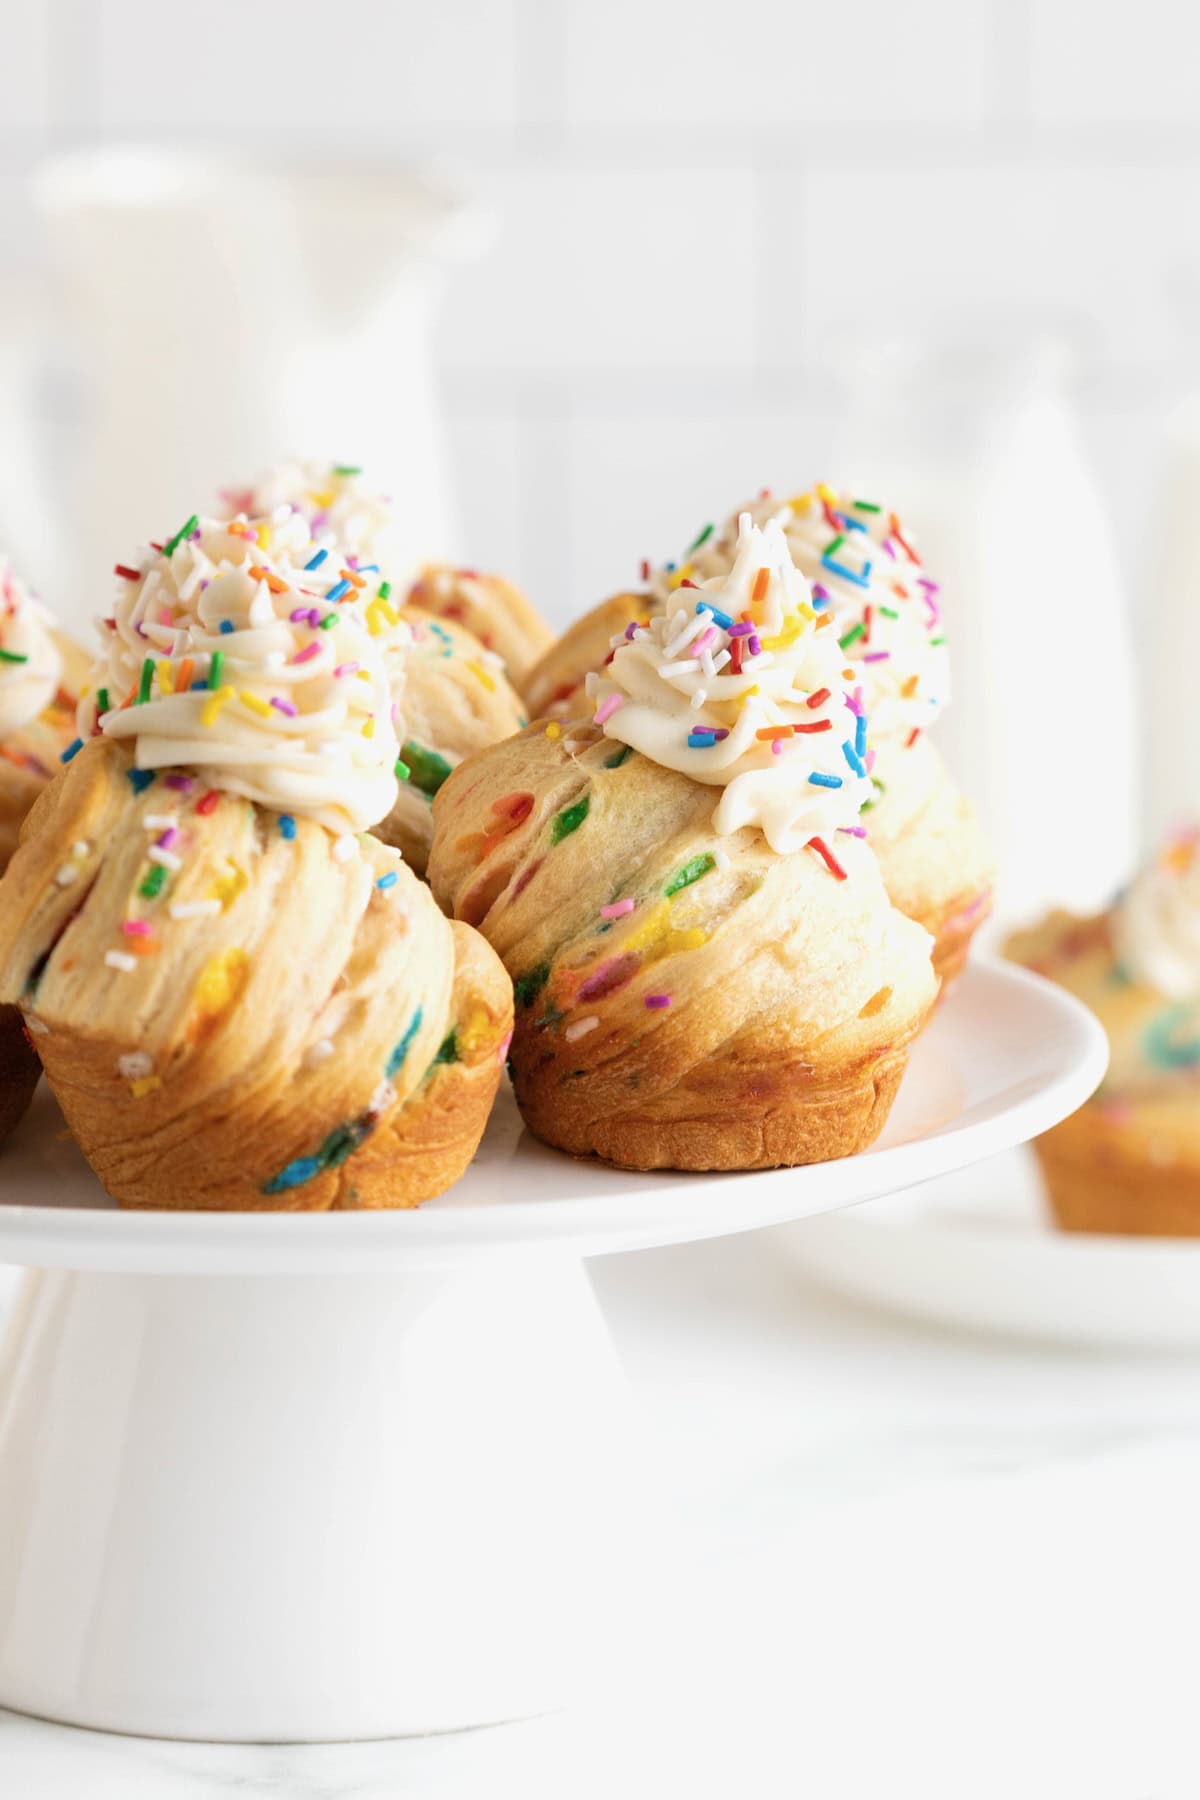 A white cake stand with five birthday confetti cruffins on top, as seen from the side.